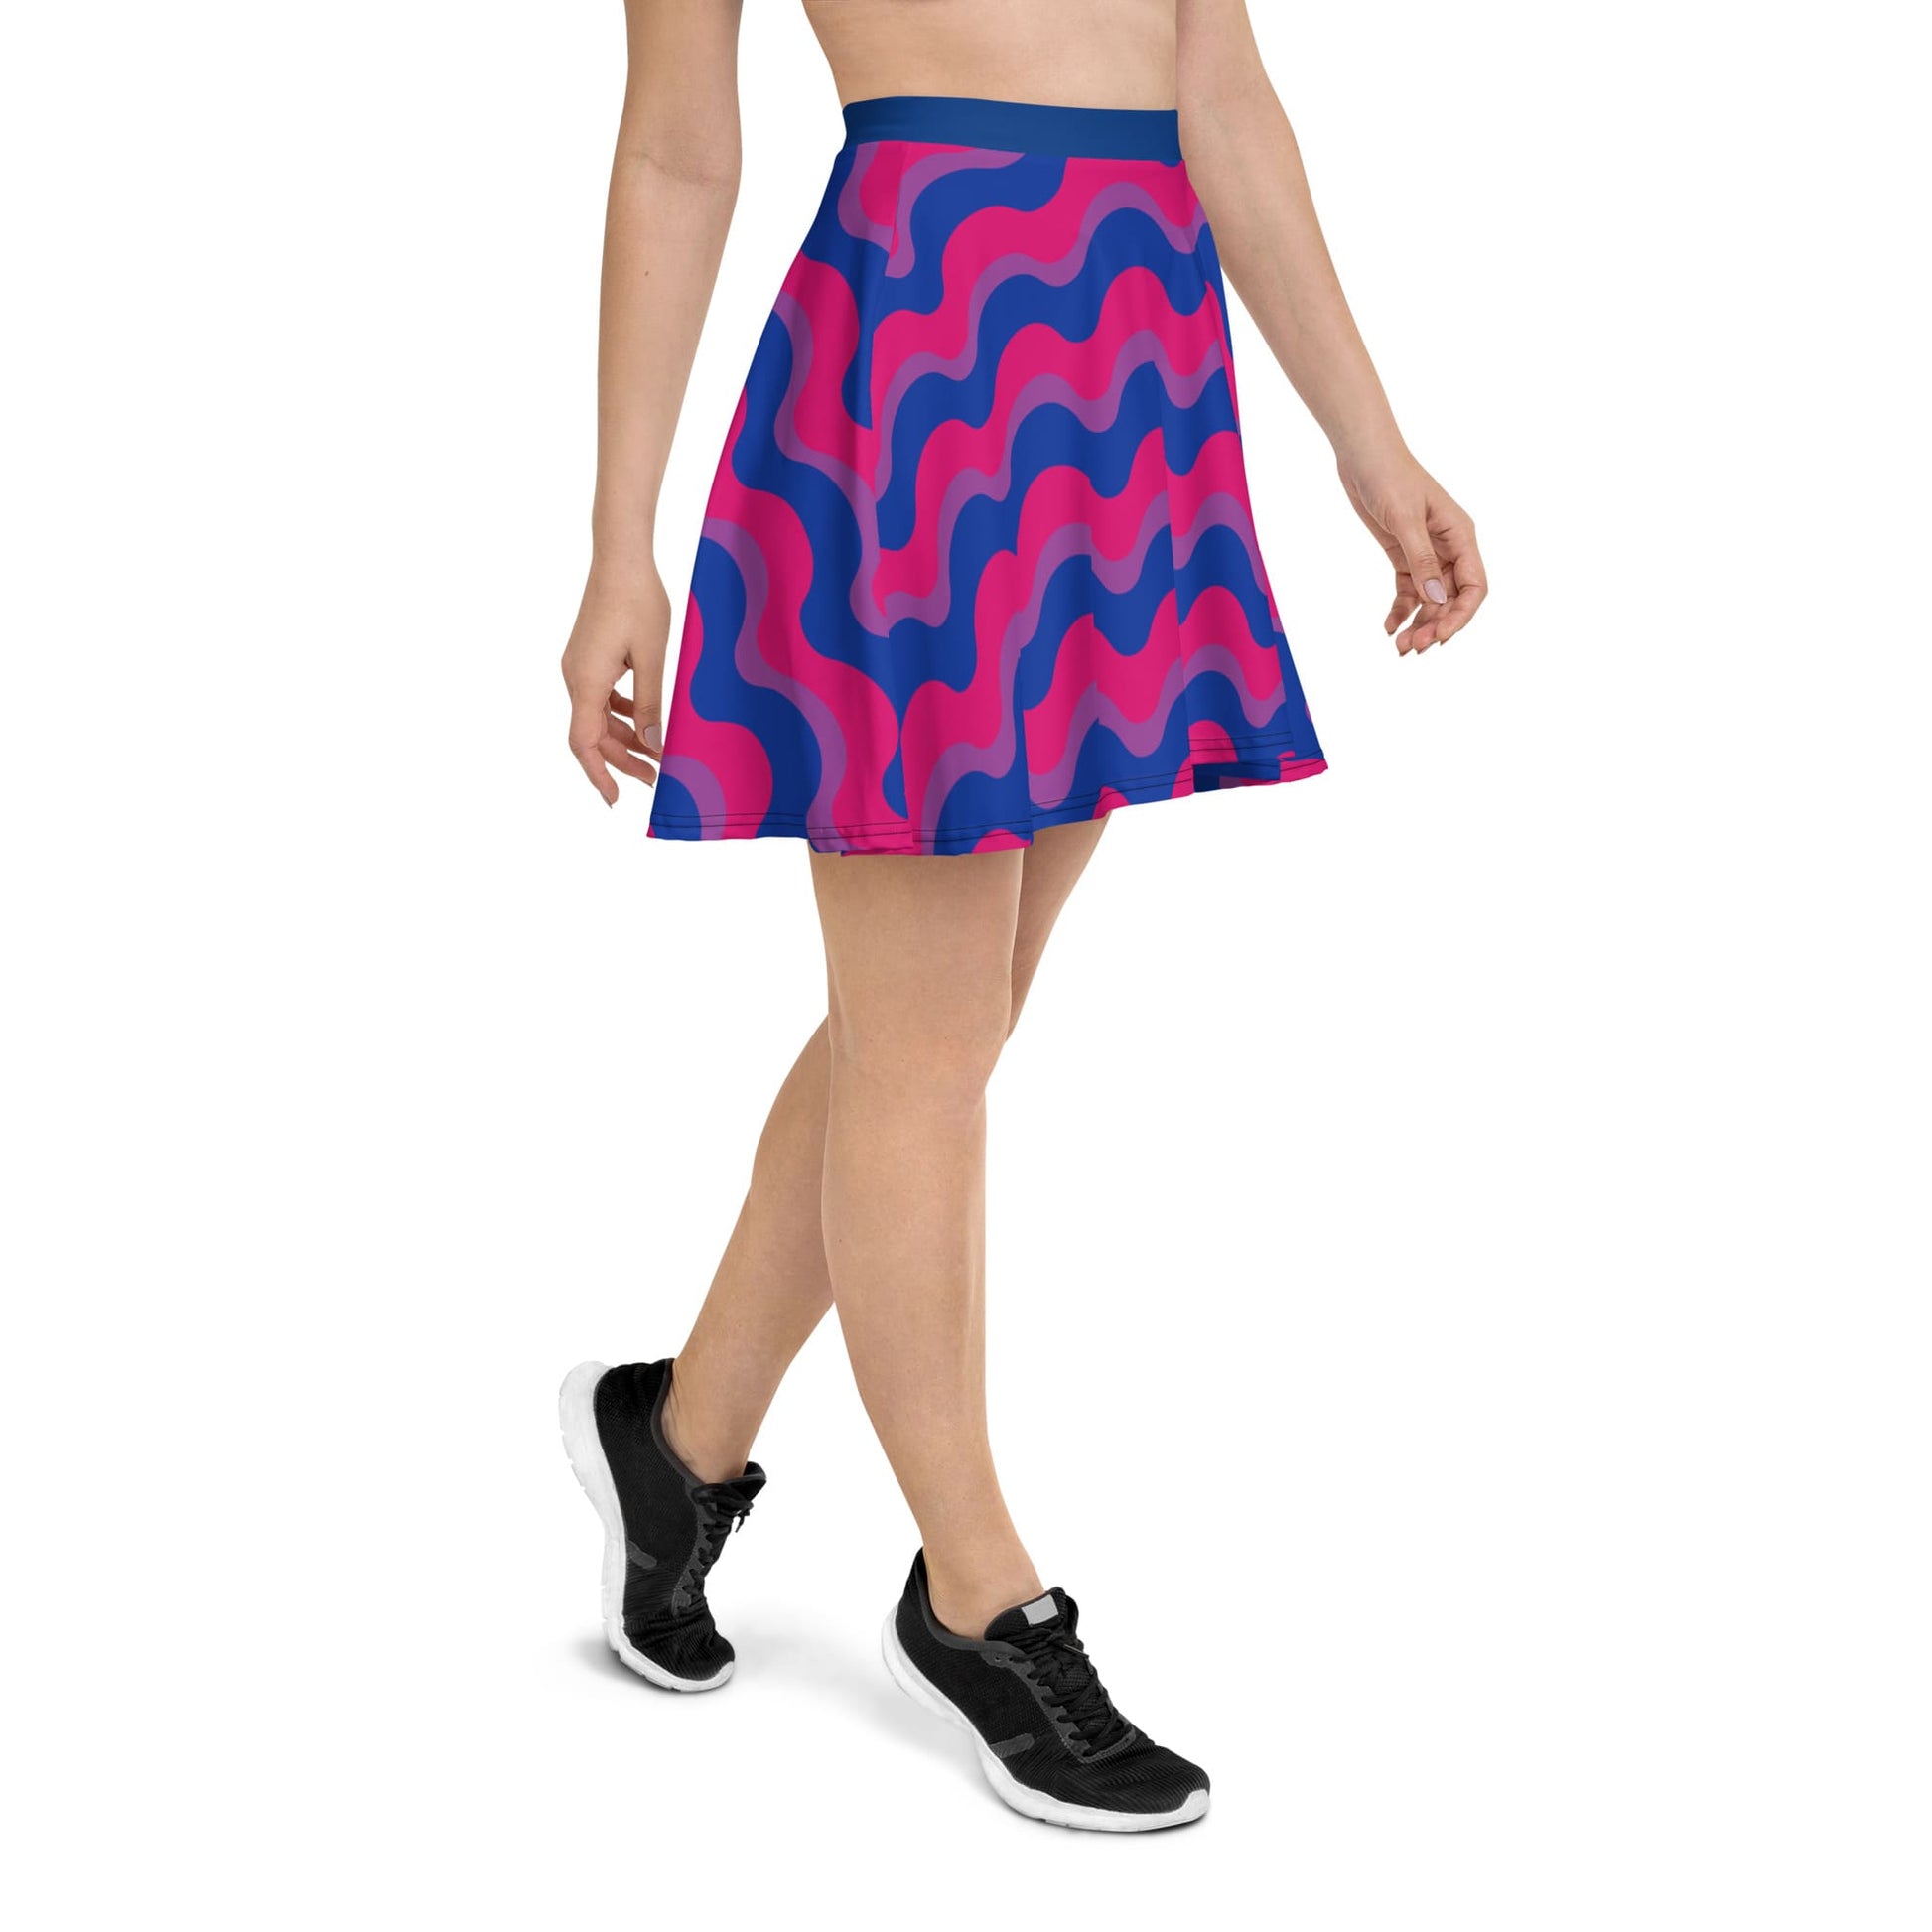 bisexual skirt, right